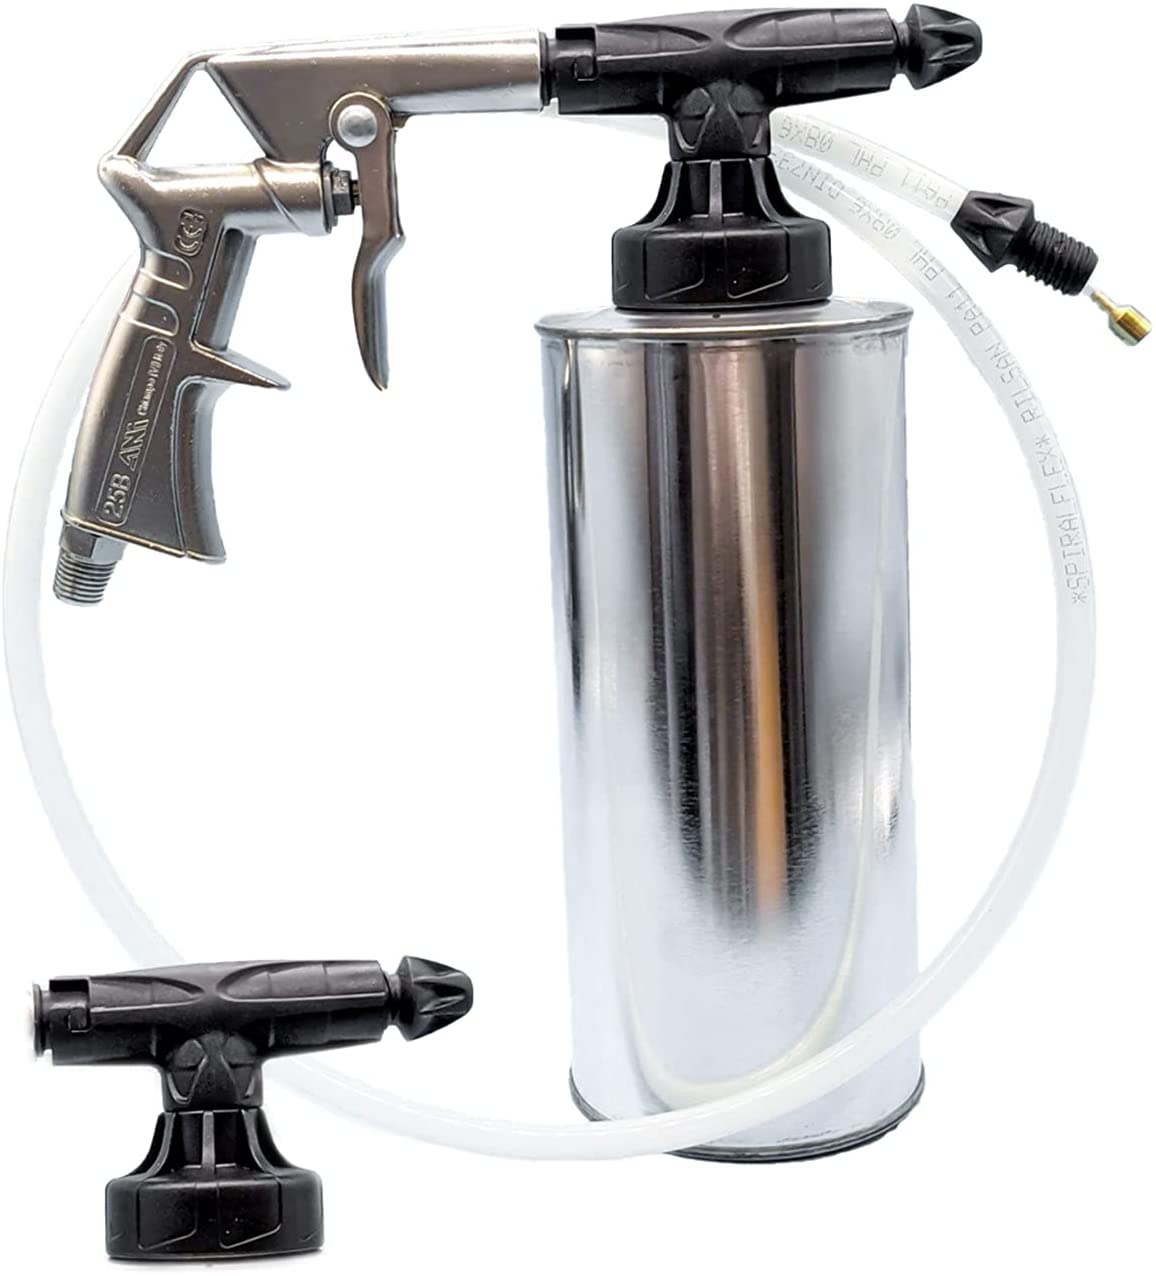 Blysk K200 Air Undercoating Gun with Suction Feed Cup, Nozzle Wand Attachment